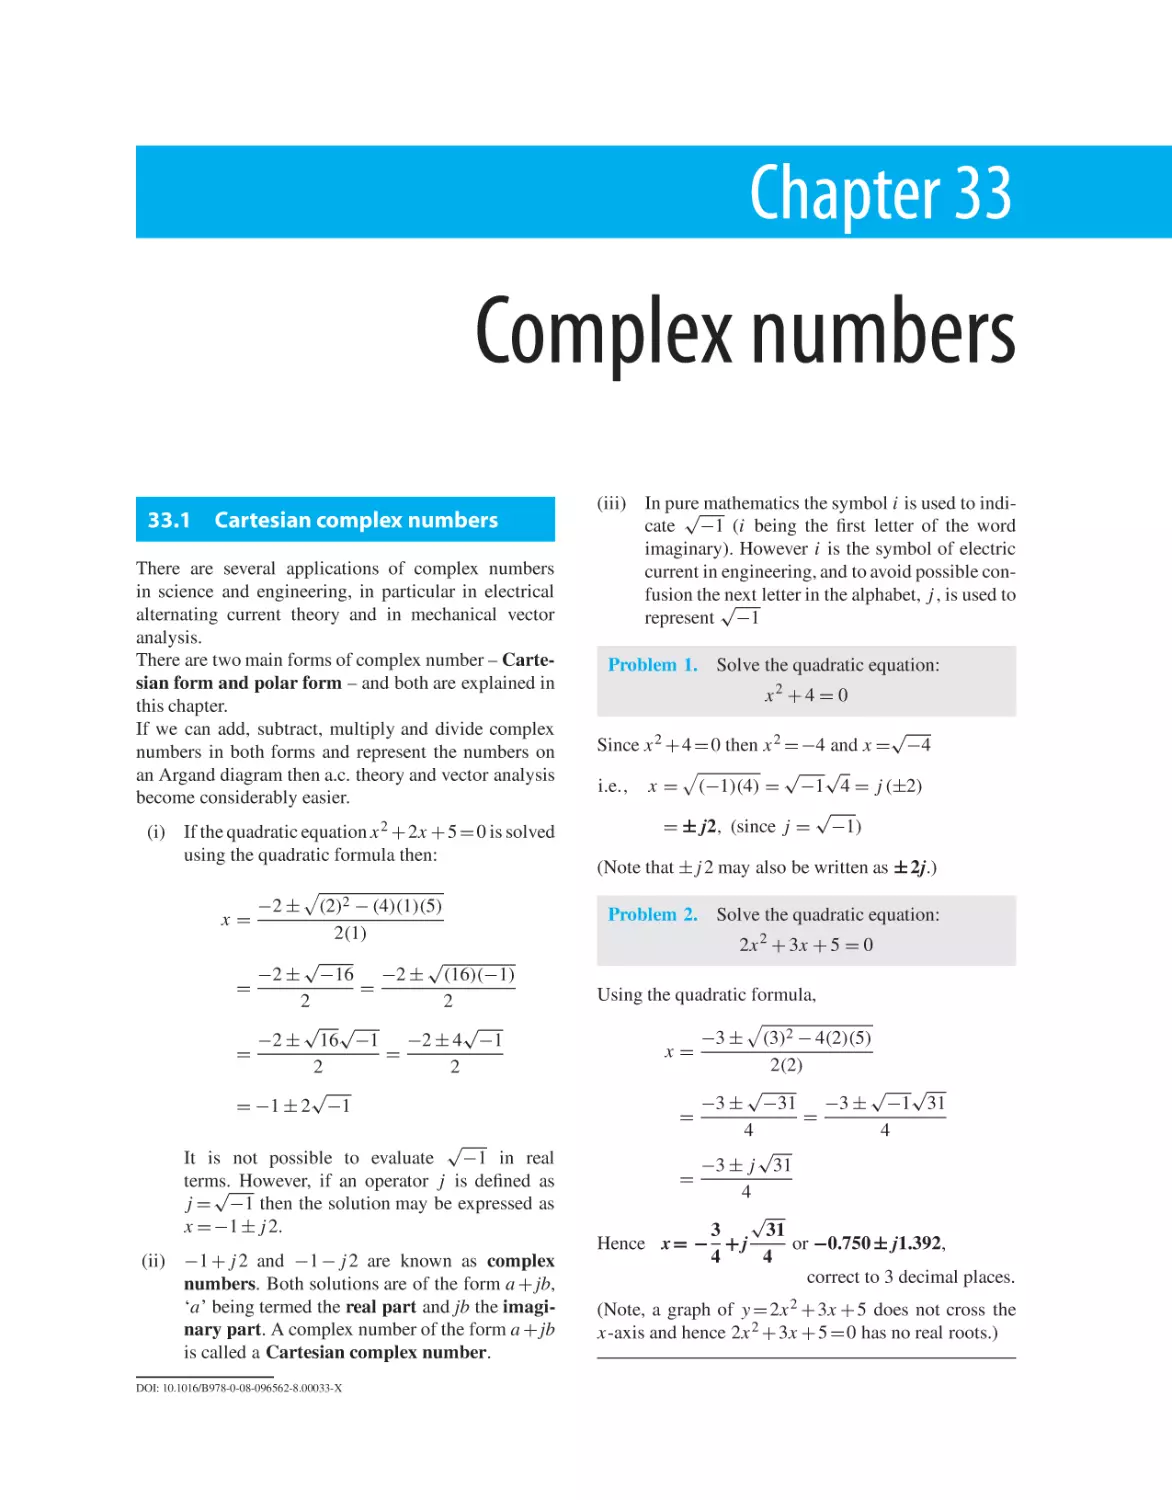 Chapter 33. Complex numbers
33.1 Cartesian complex numbers